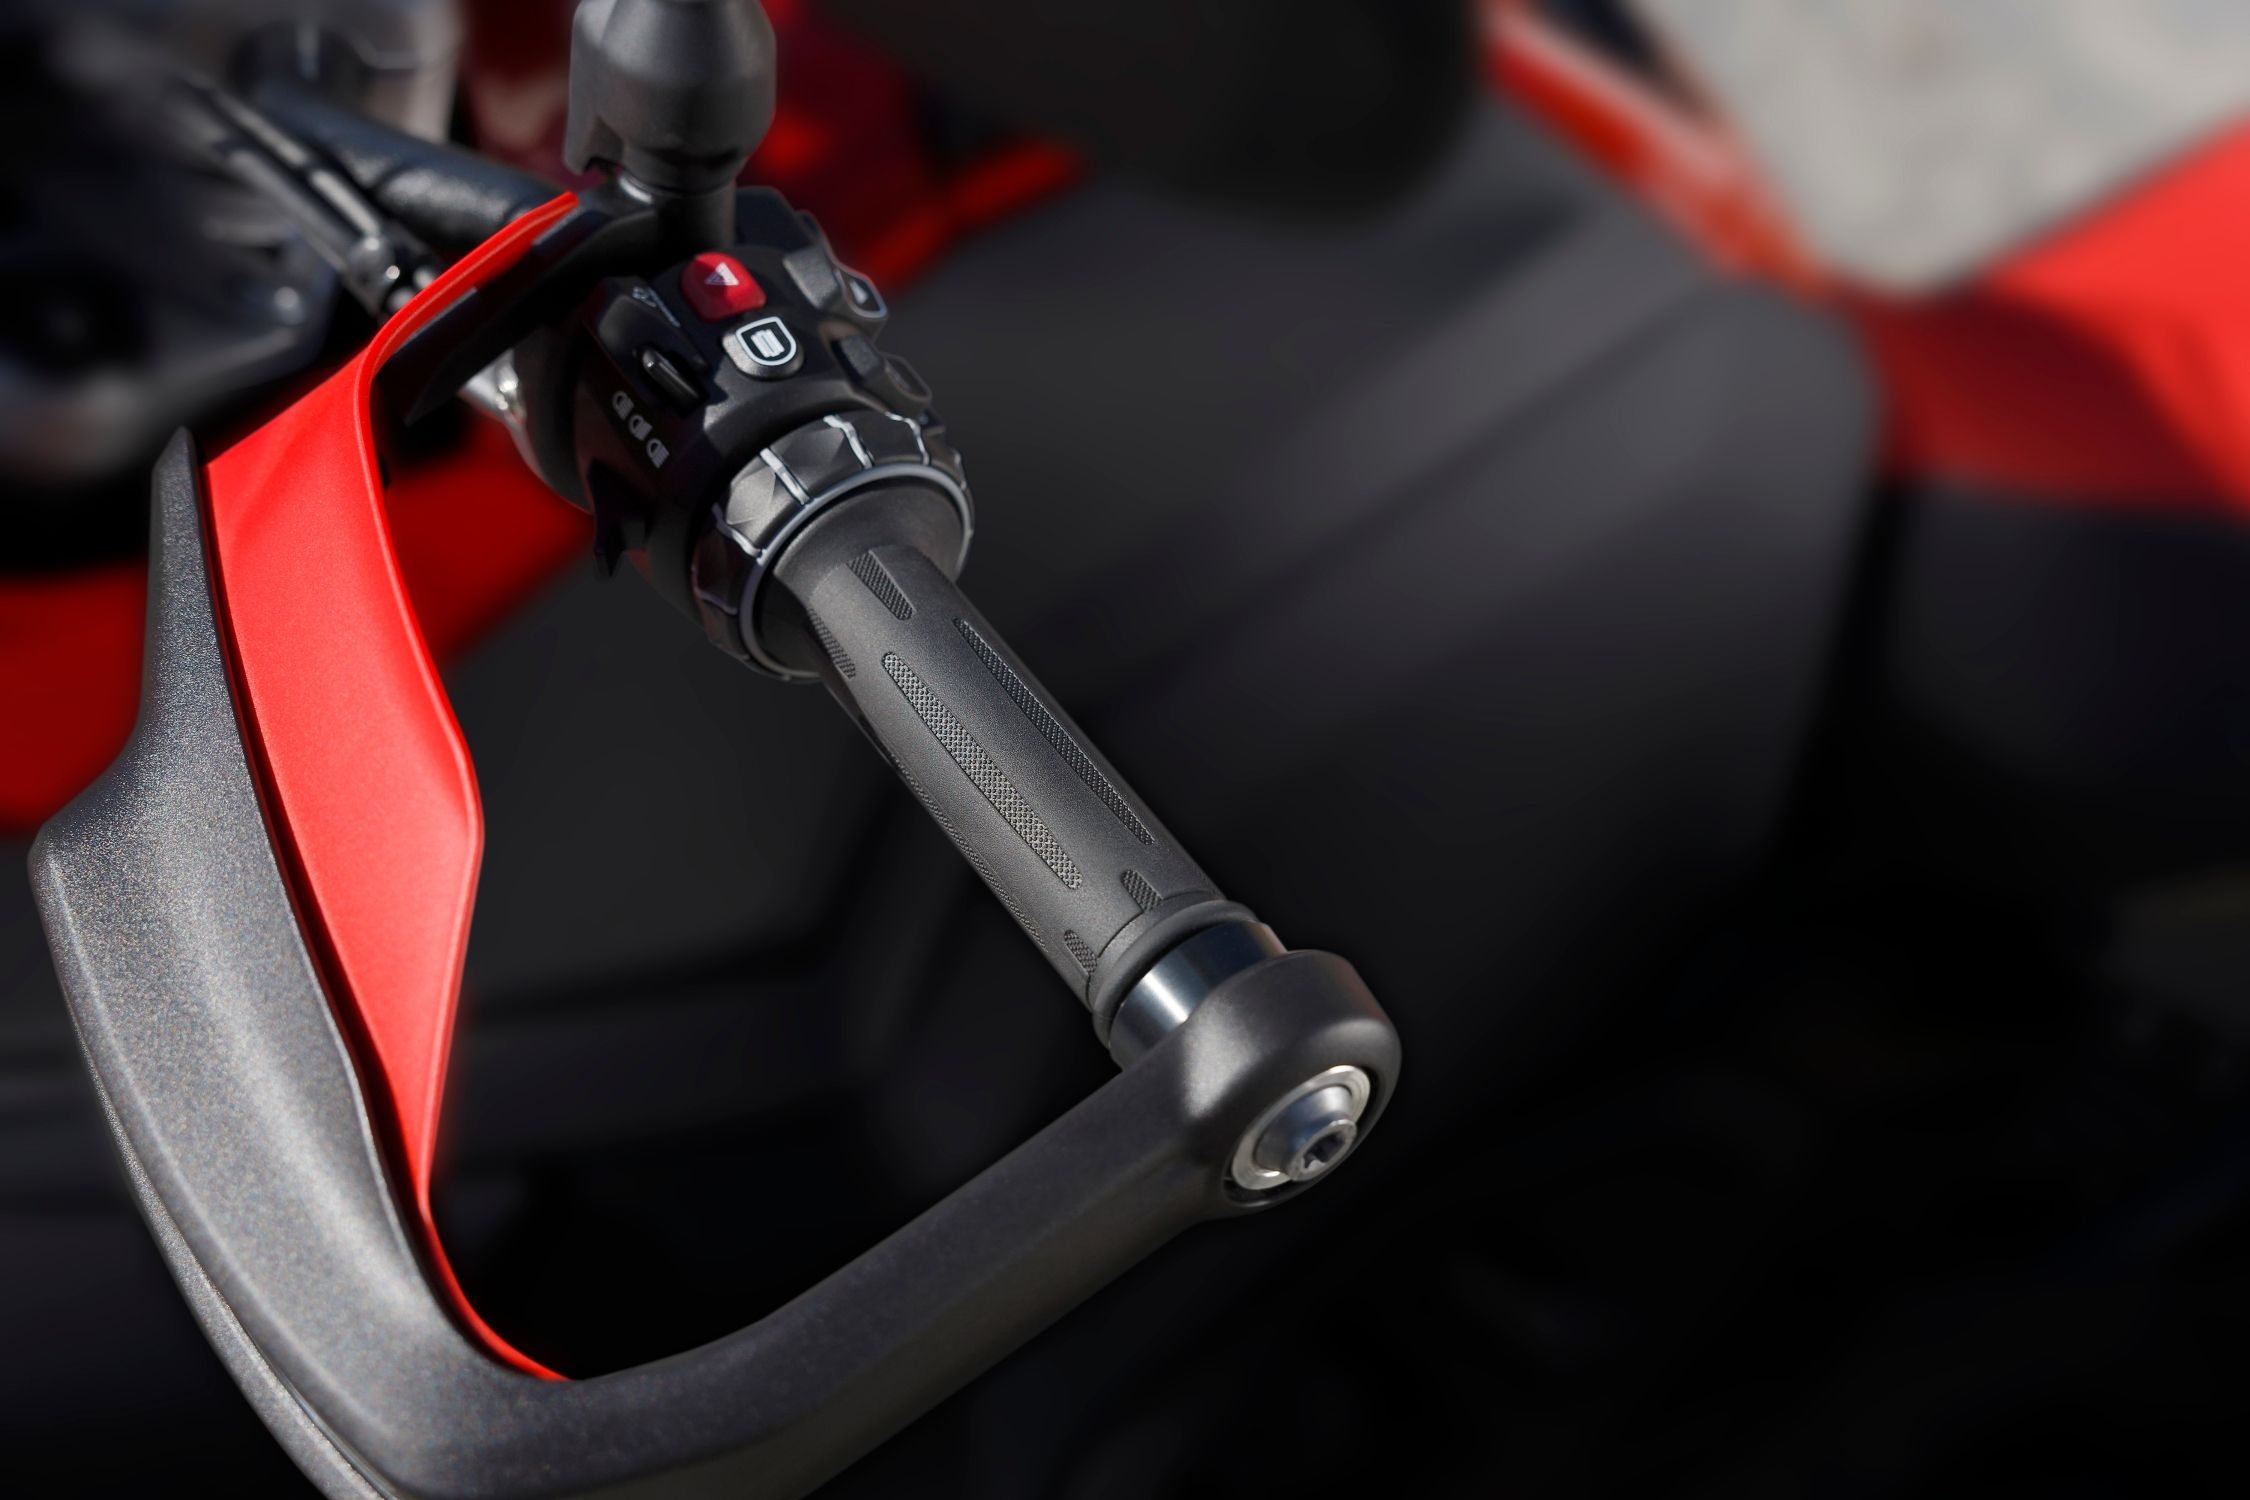 BMW Motorrad's new manual or automatic shift system.